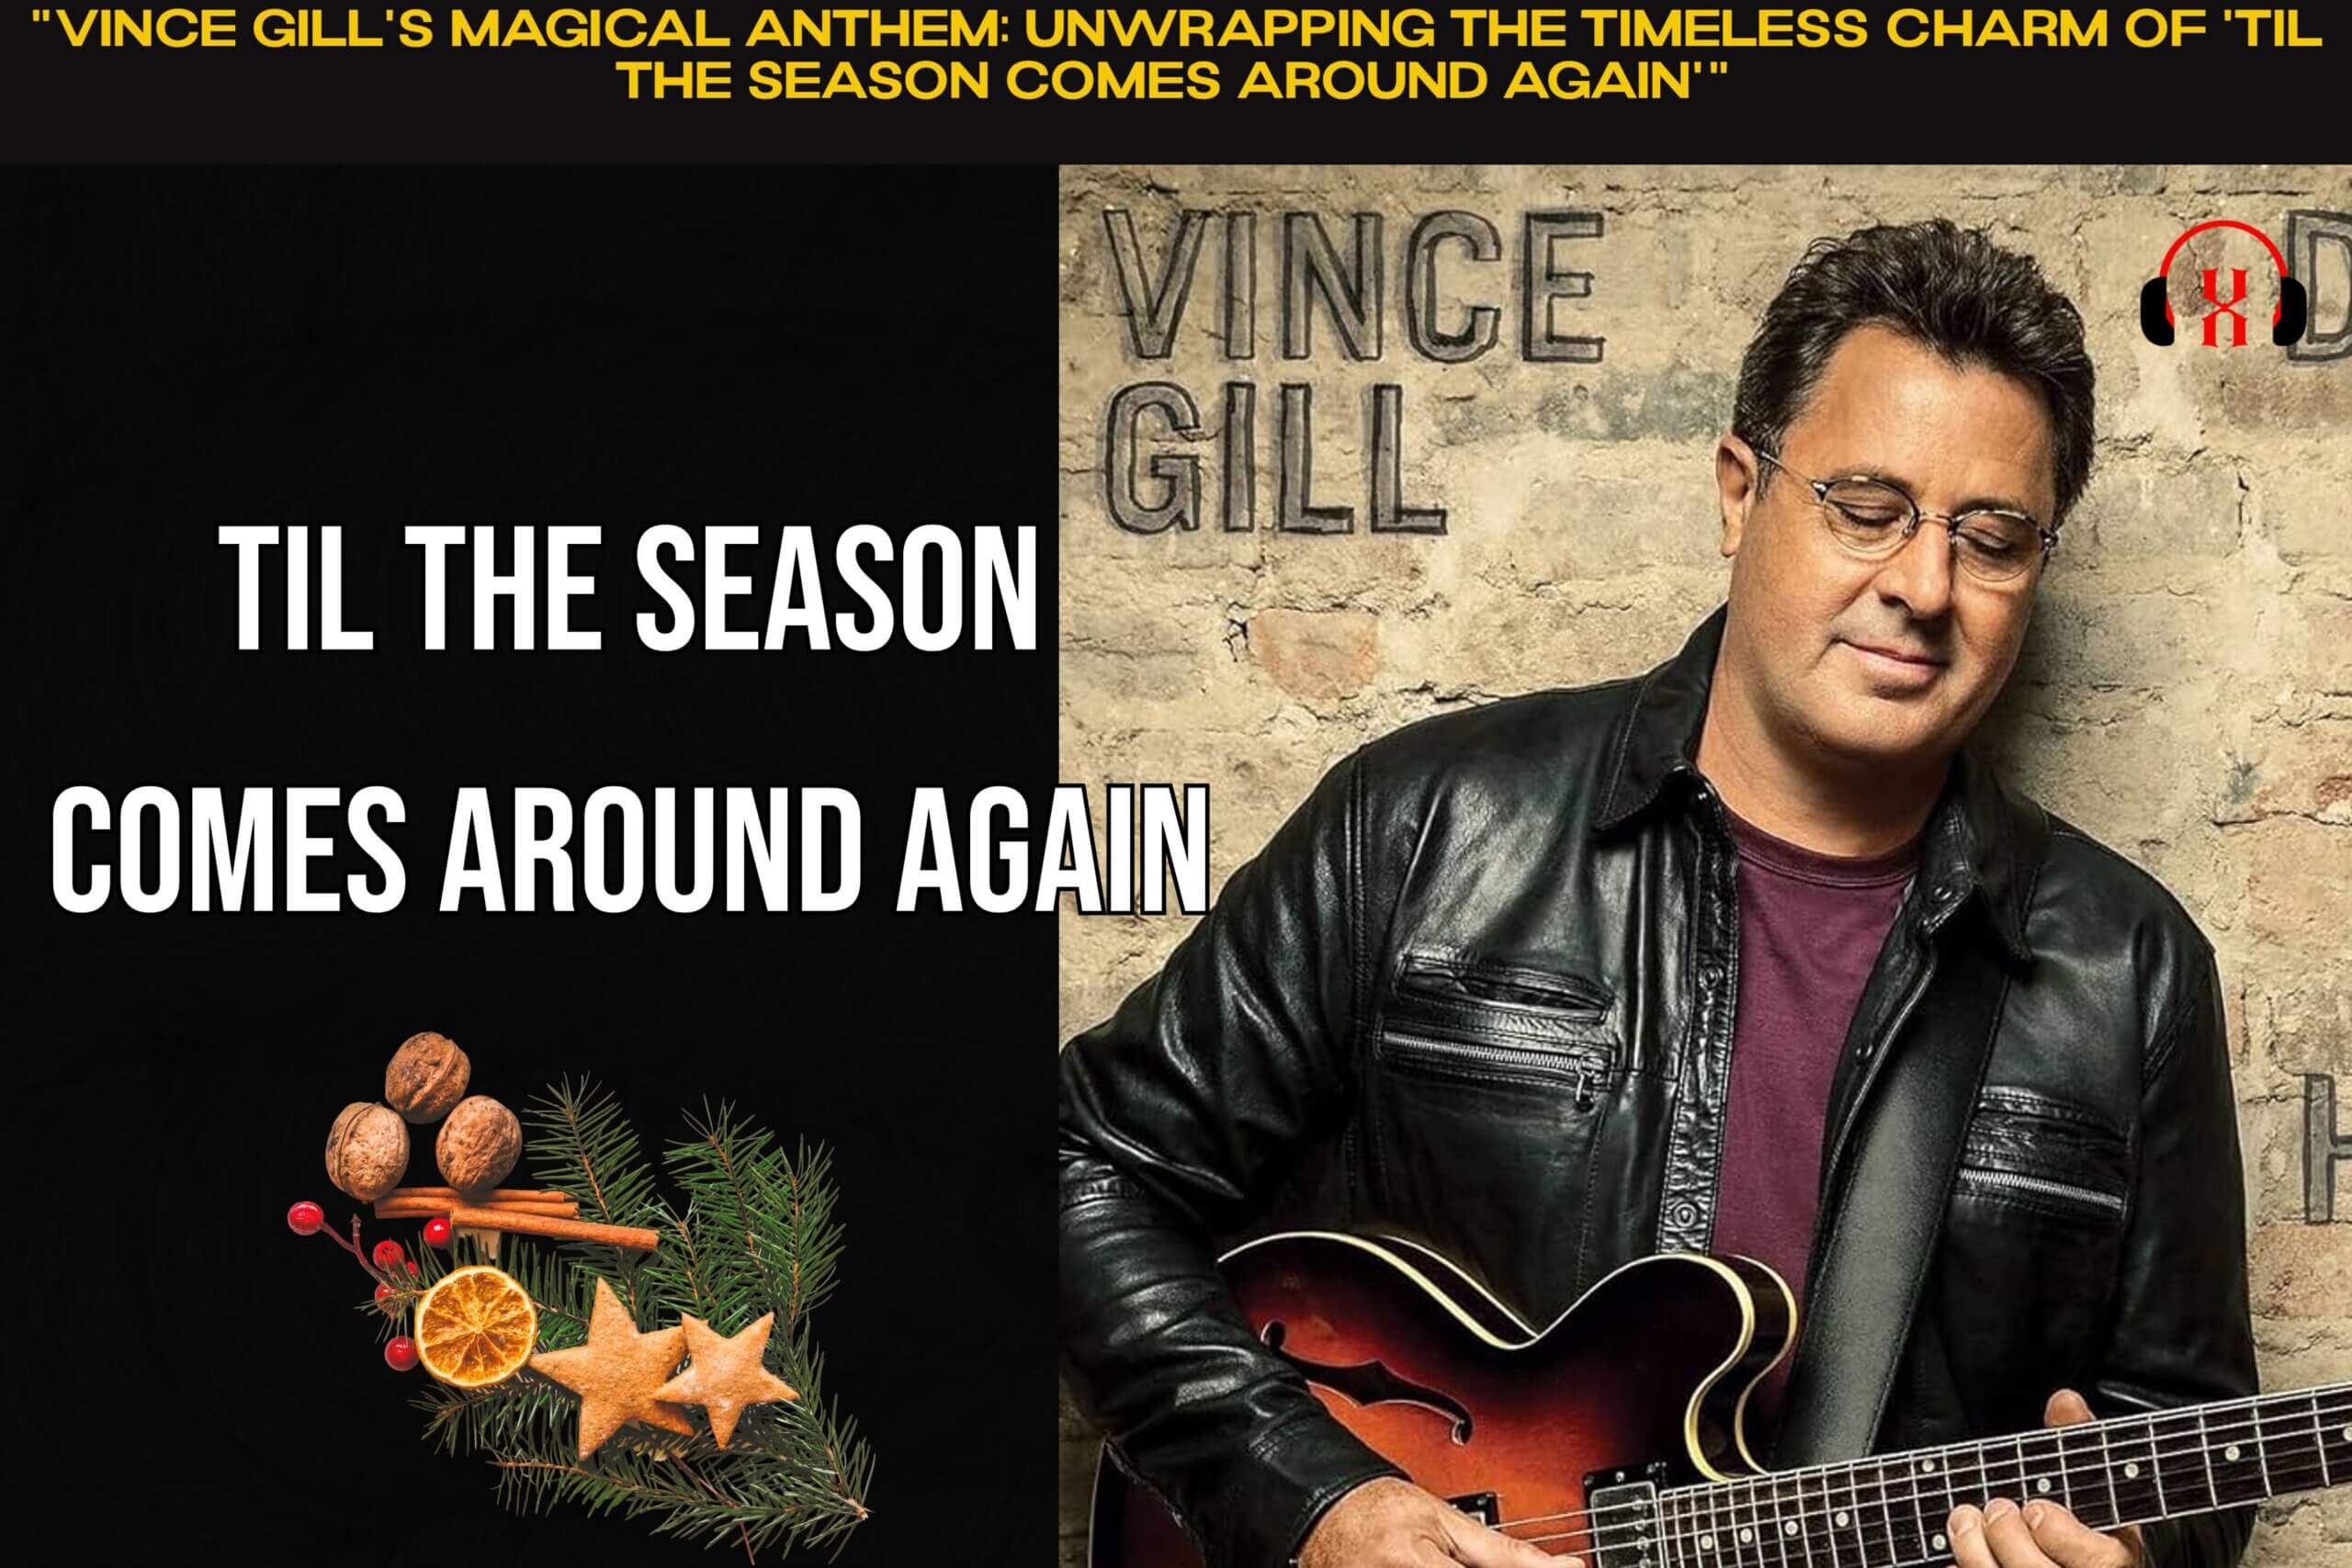 “Vince Gill’s Magical Anthem: Unwrapping the Timeless Charm of ‘Til the Season Comes Around Again'”